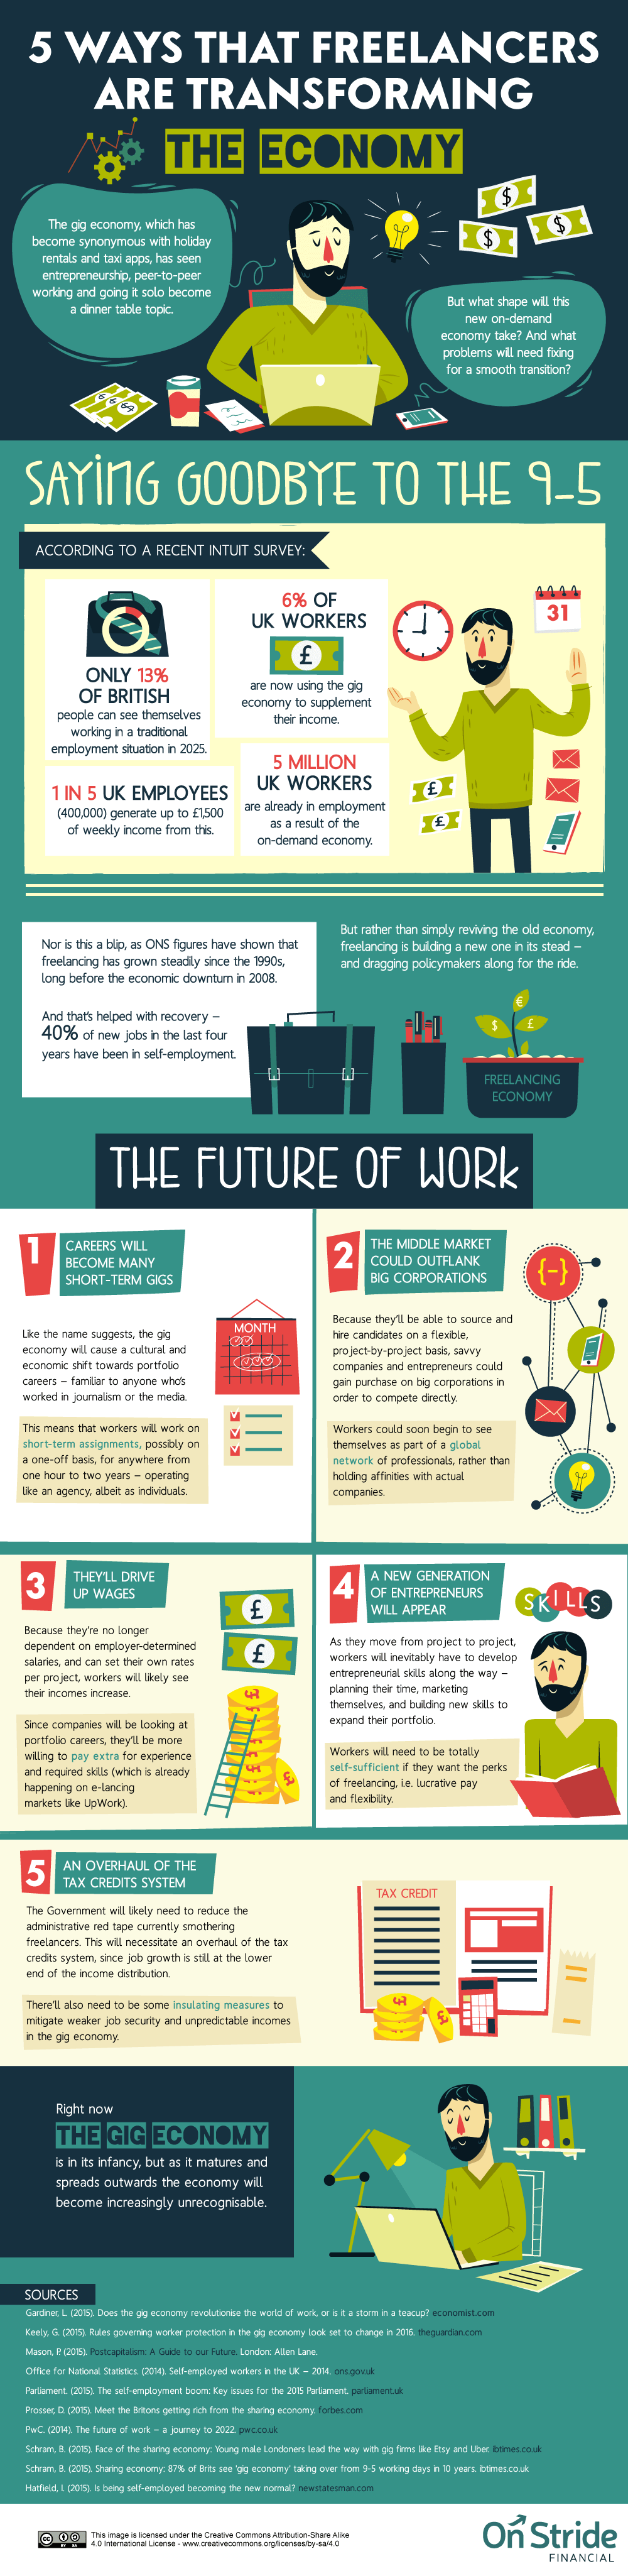 5 Ways that Freelancers are Transforming the Economy Infographic